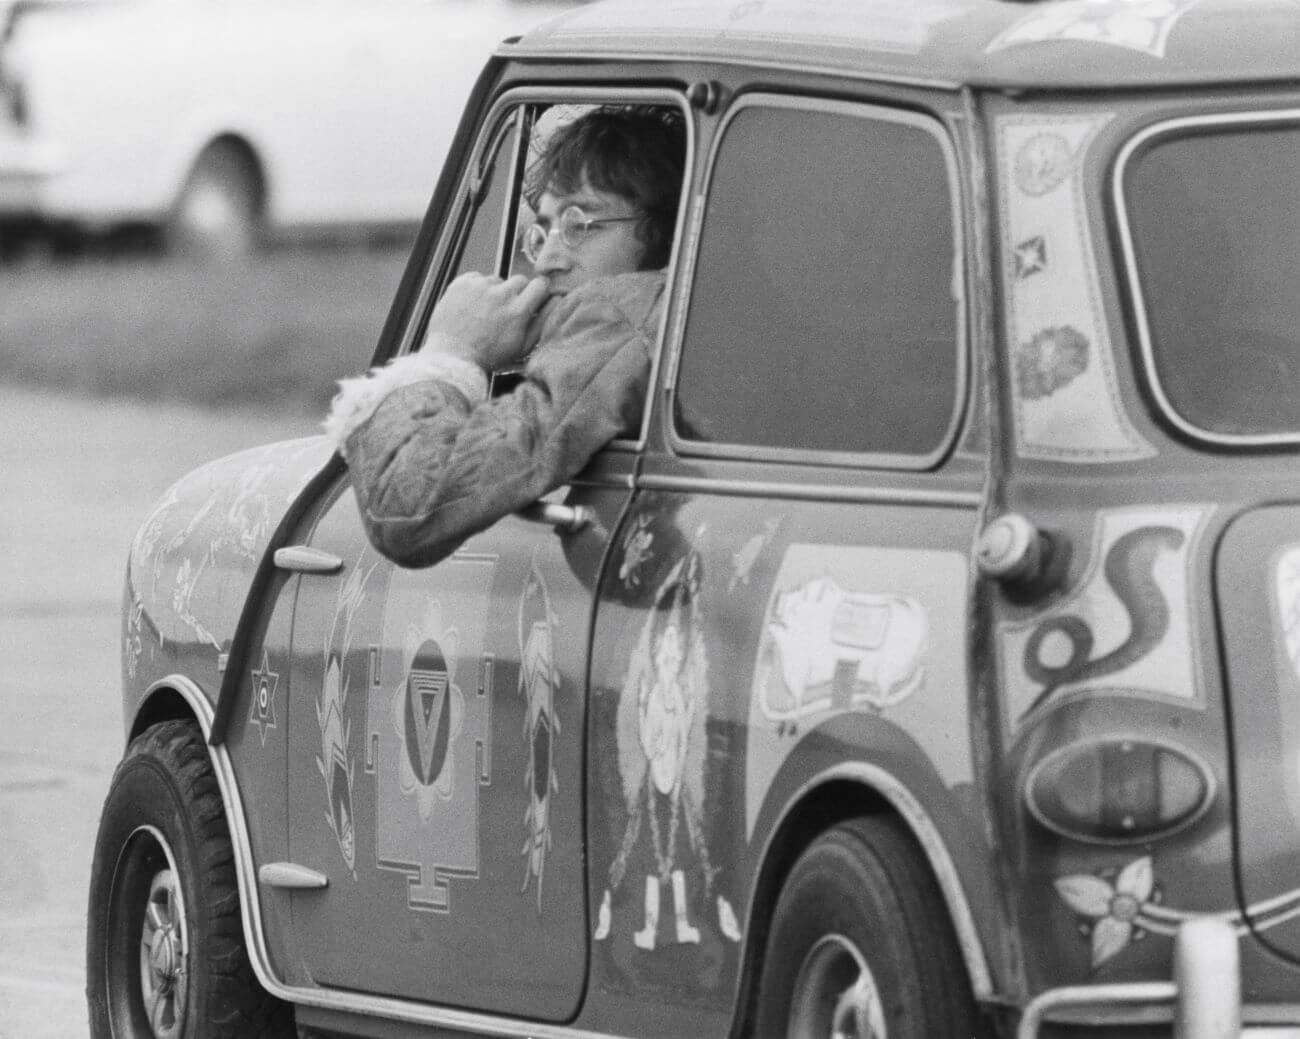 A black and white picture of John Lennon leaning out the window of a car. He sits in the front seat.